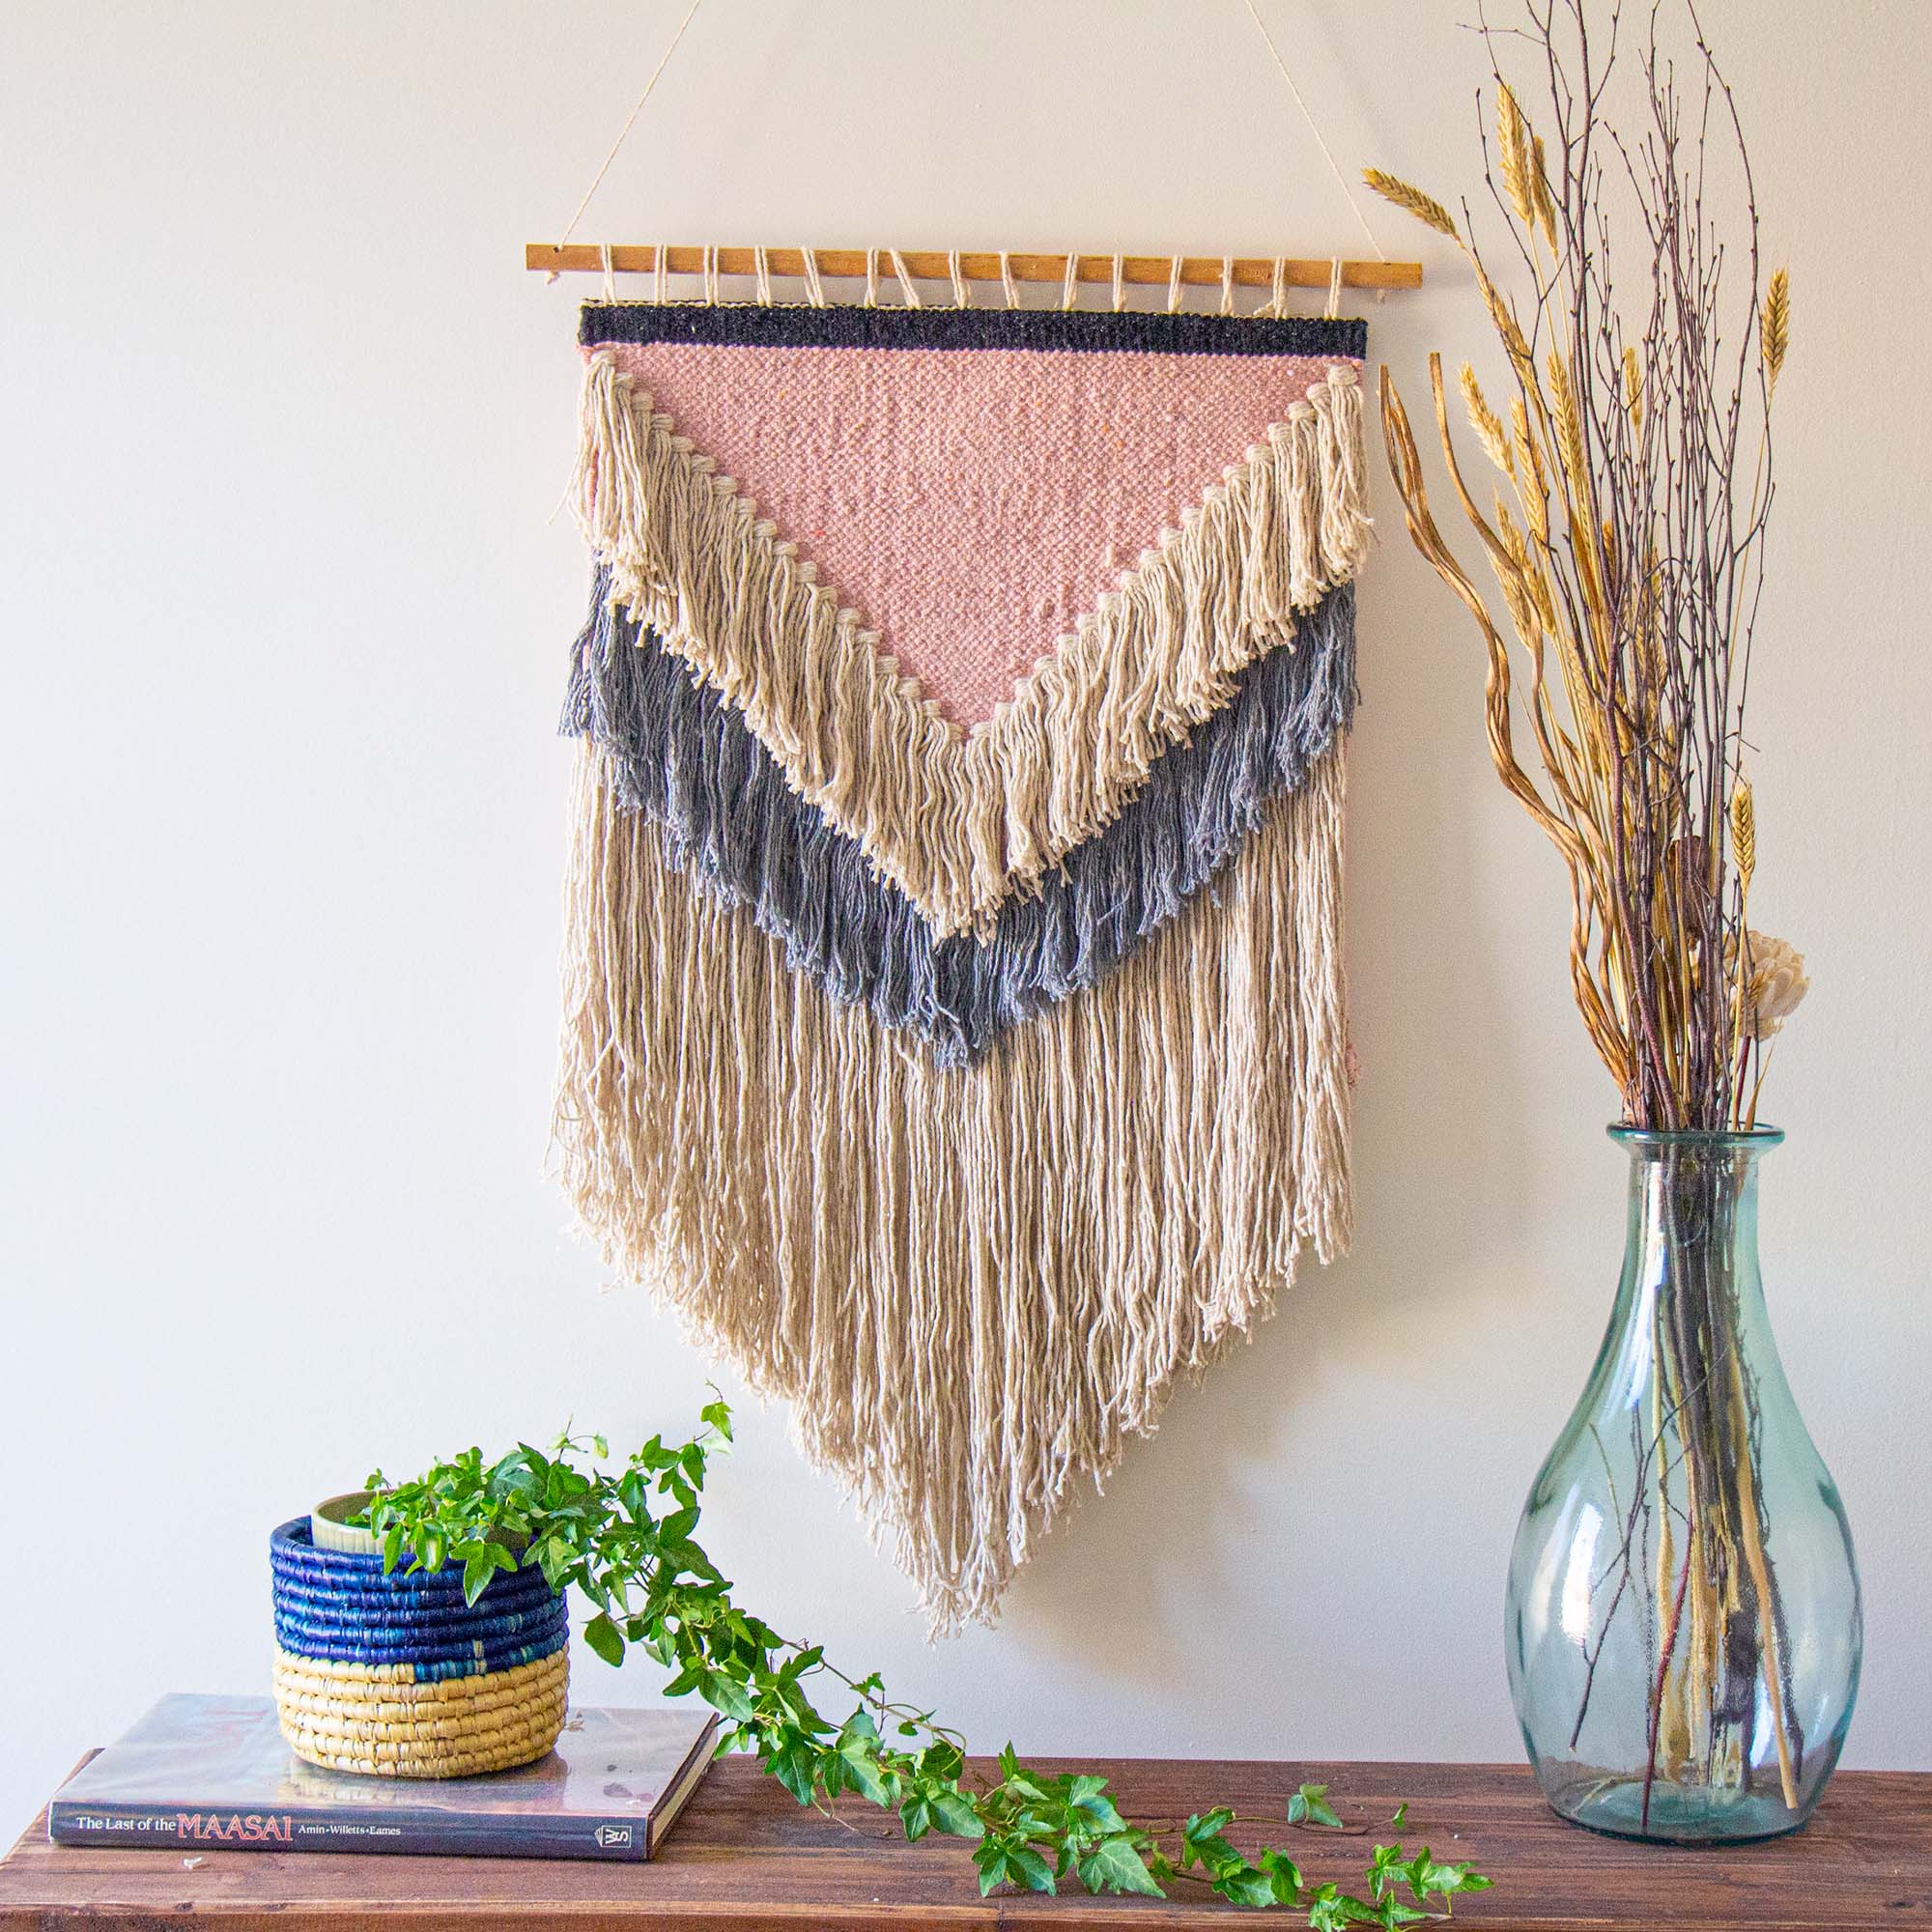 Handwoven Boho Wall Hanging, Pink with Cream Fringe